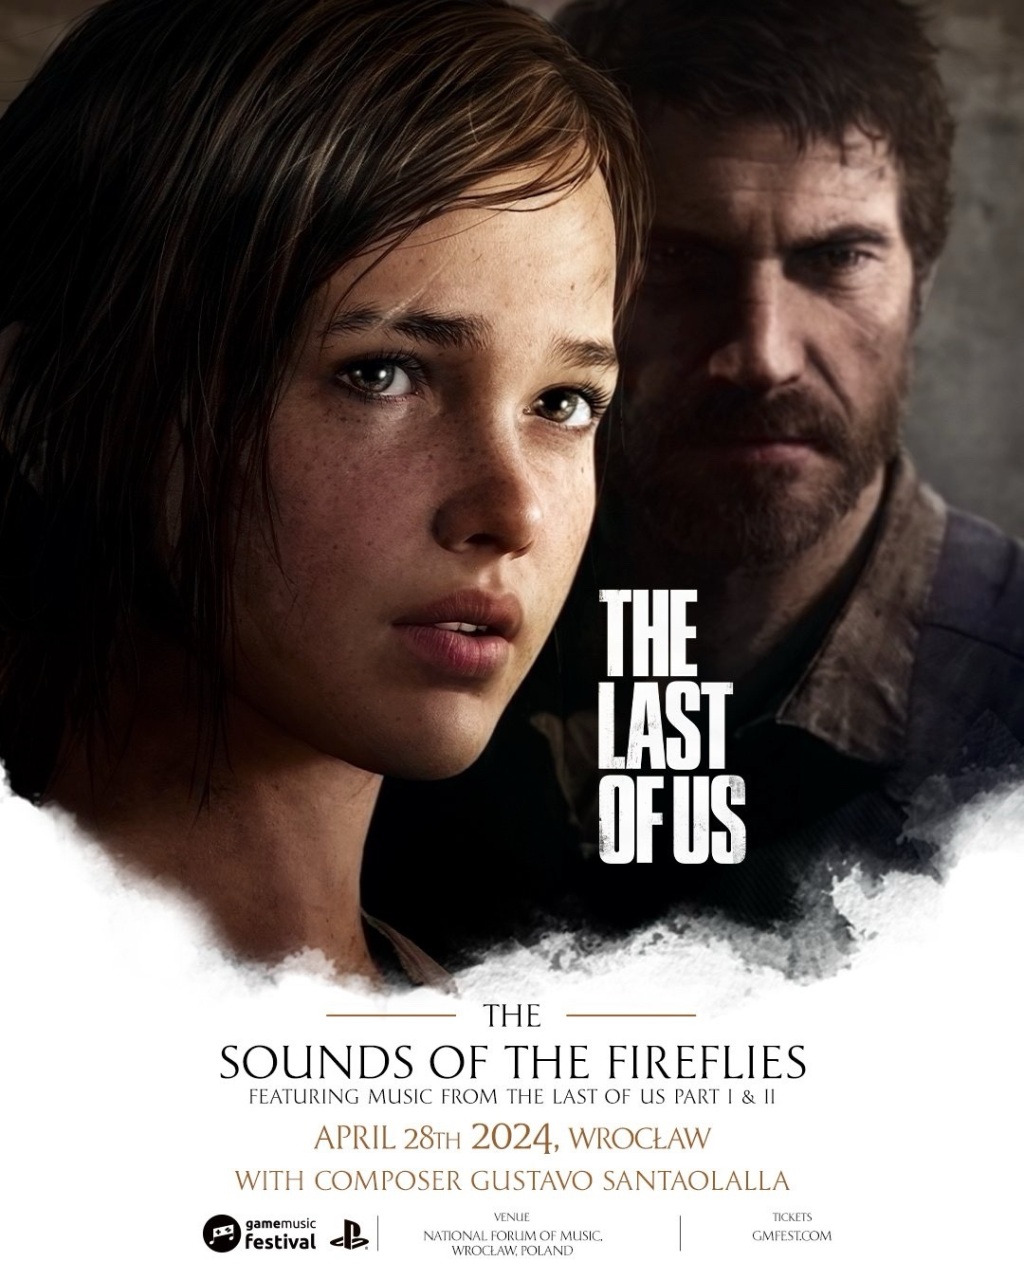 The Last of Us: The Sound of Fireflies Concert Merch from Game Music Festival 2024